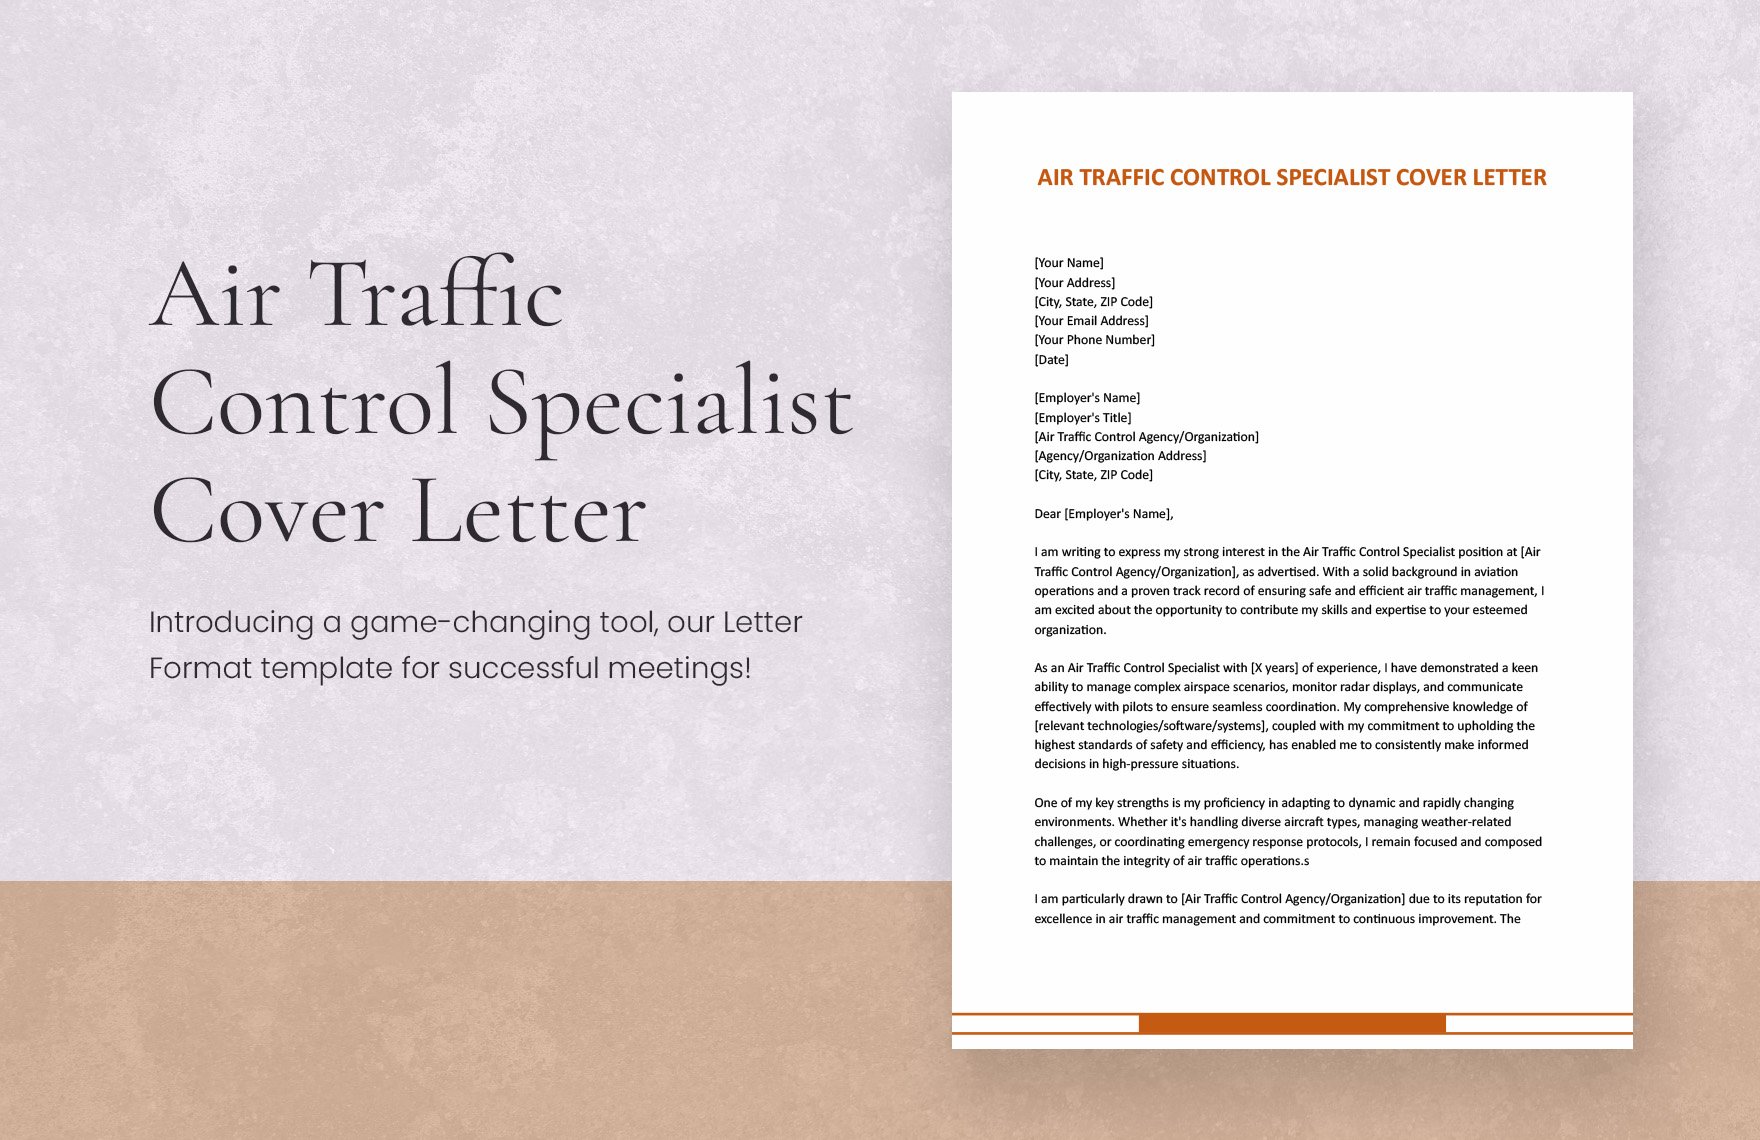 Air Traffic Control Specialist Cover Letter in Word, Google Docs, Apple Pages